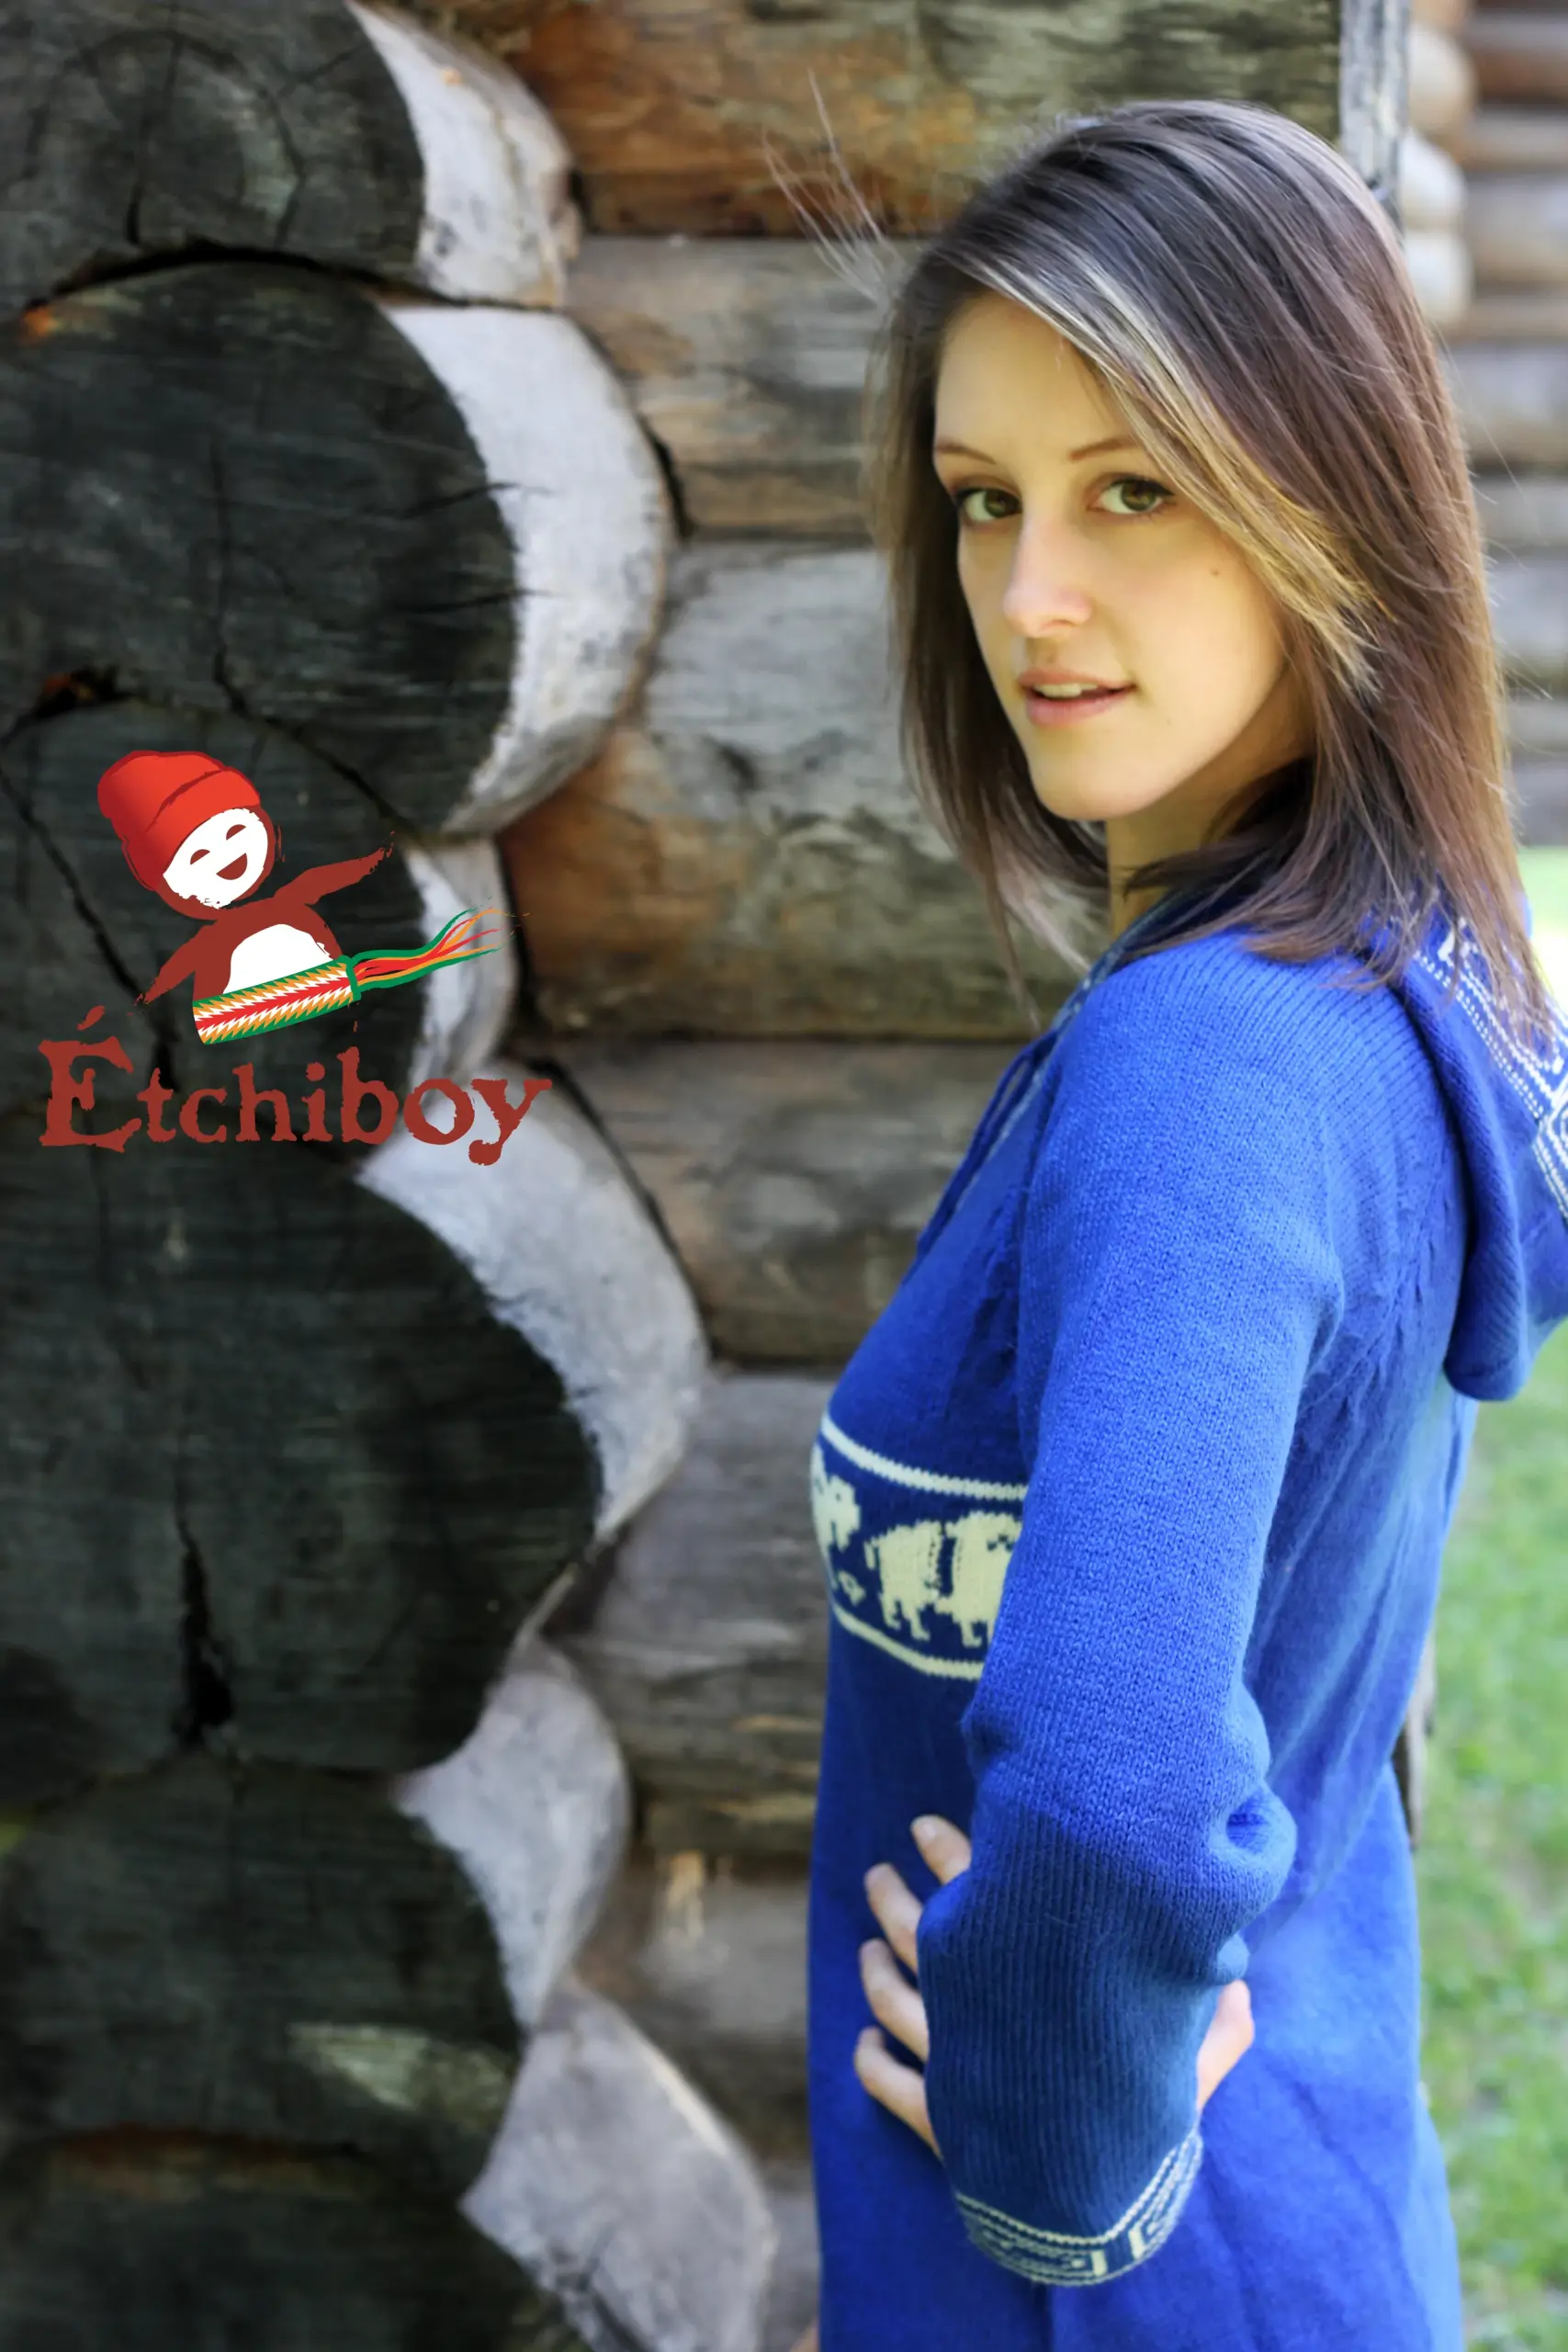 Hooded Blue Sweater With Bisons Chandail Bleu Avec Capuchon Avec Bisons